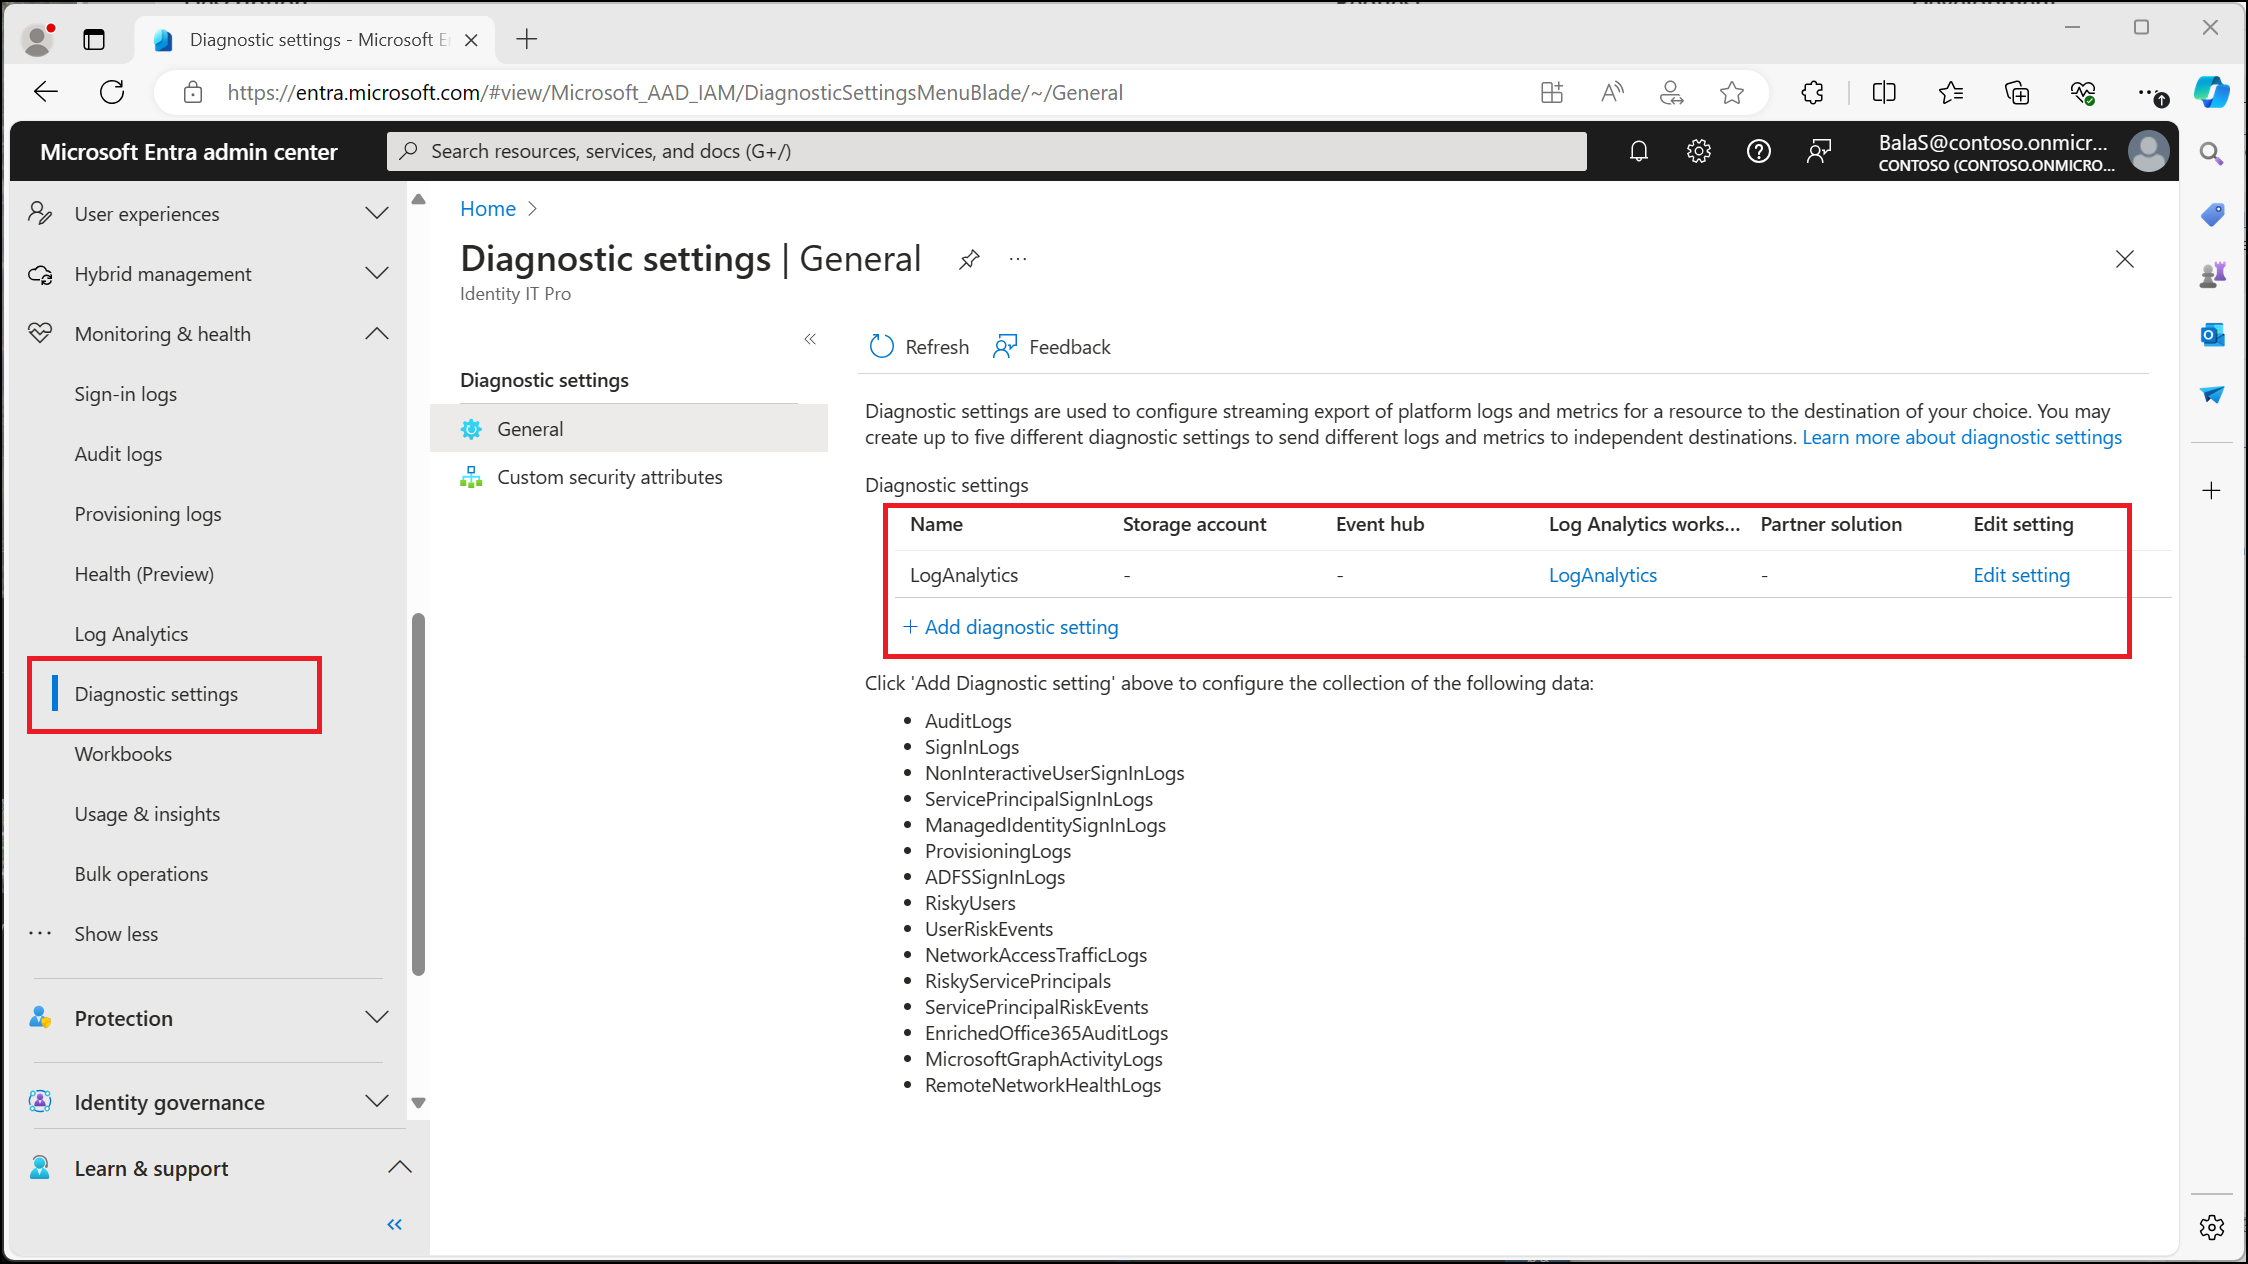 Diagnostic settings screen in Microsoft Entra ID showing existing configuration